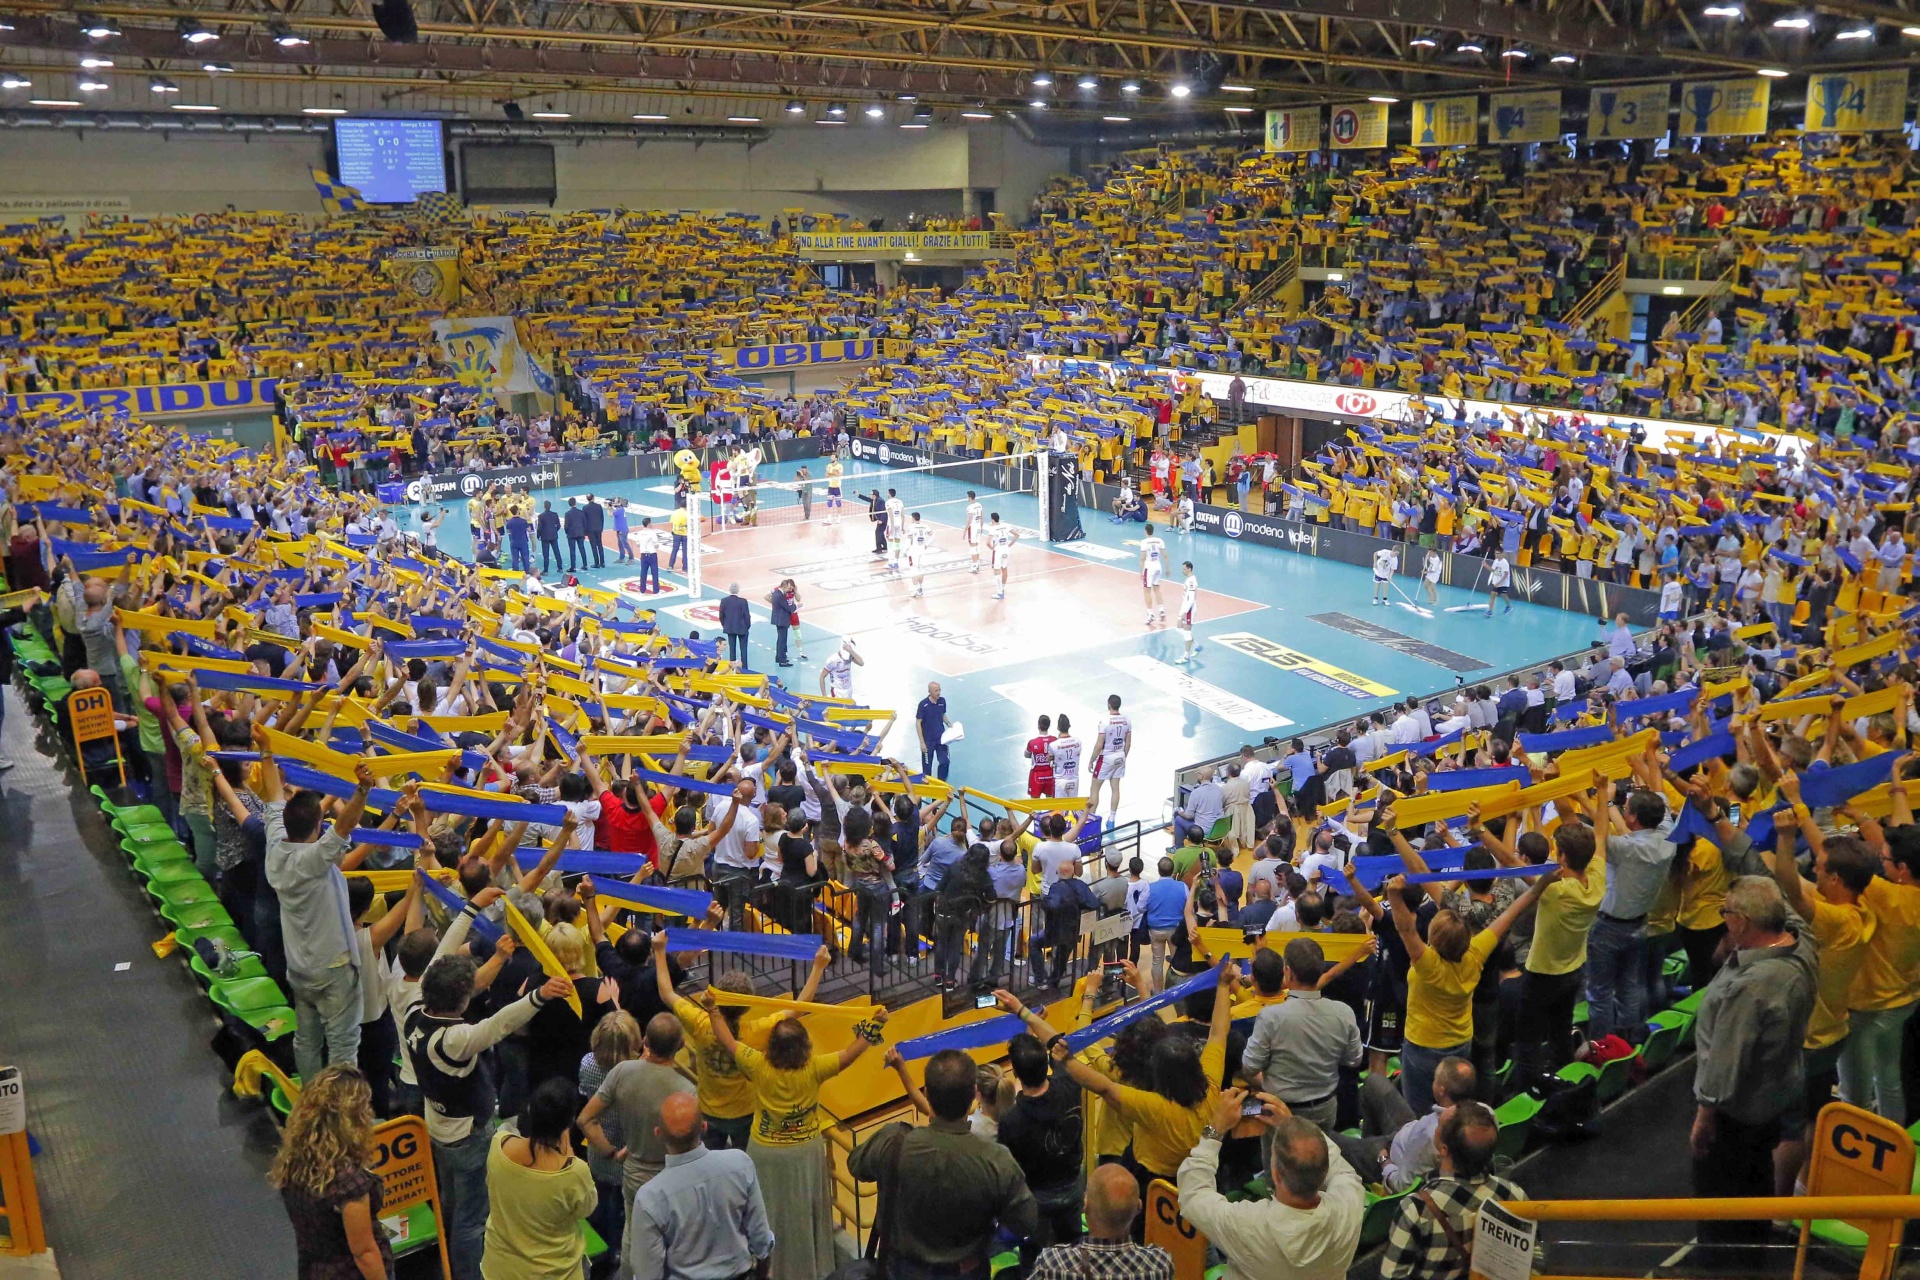 modena-volley-trento-2-play-off-6-1-2078